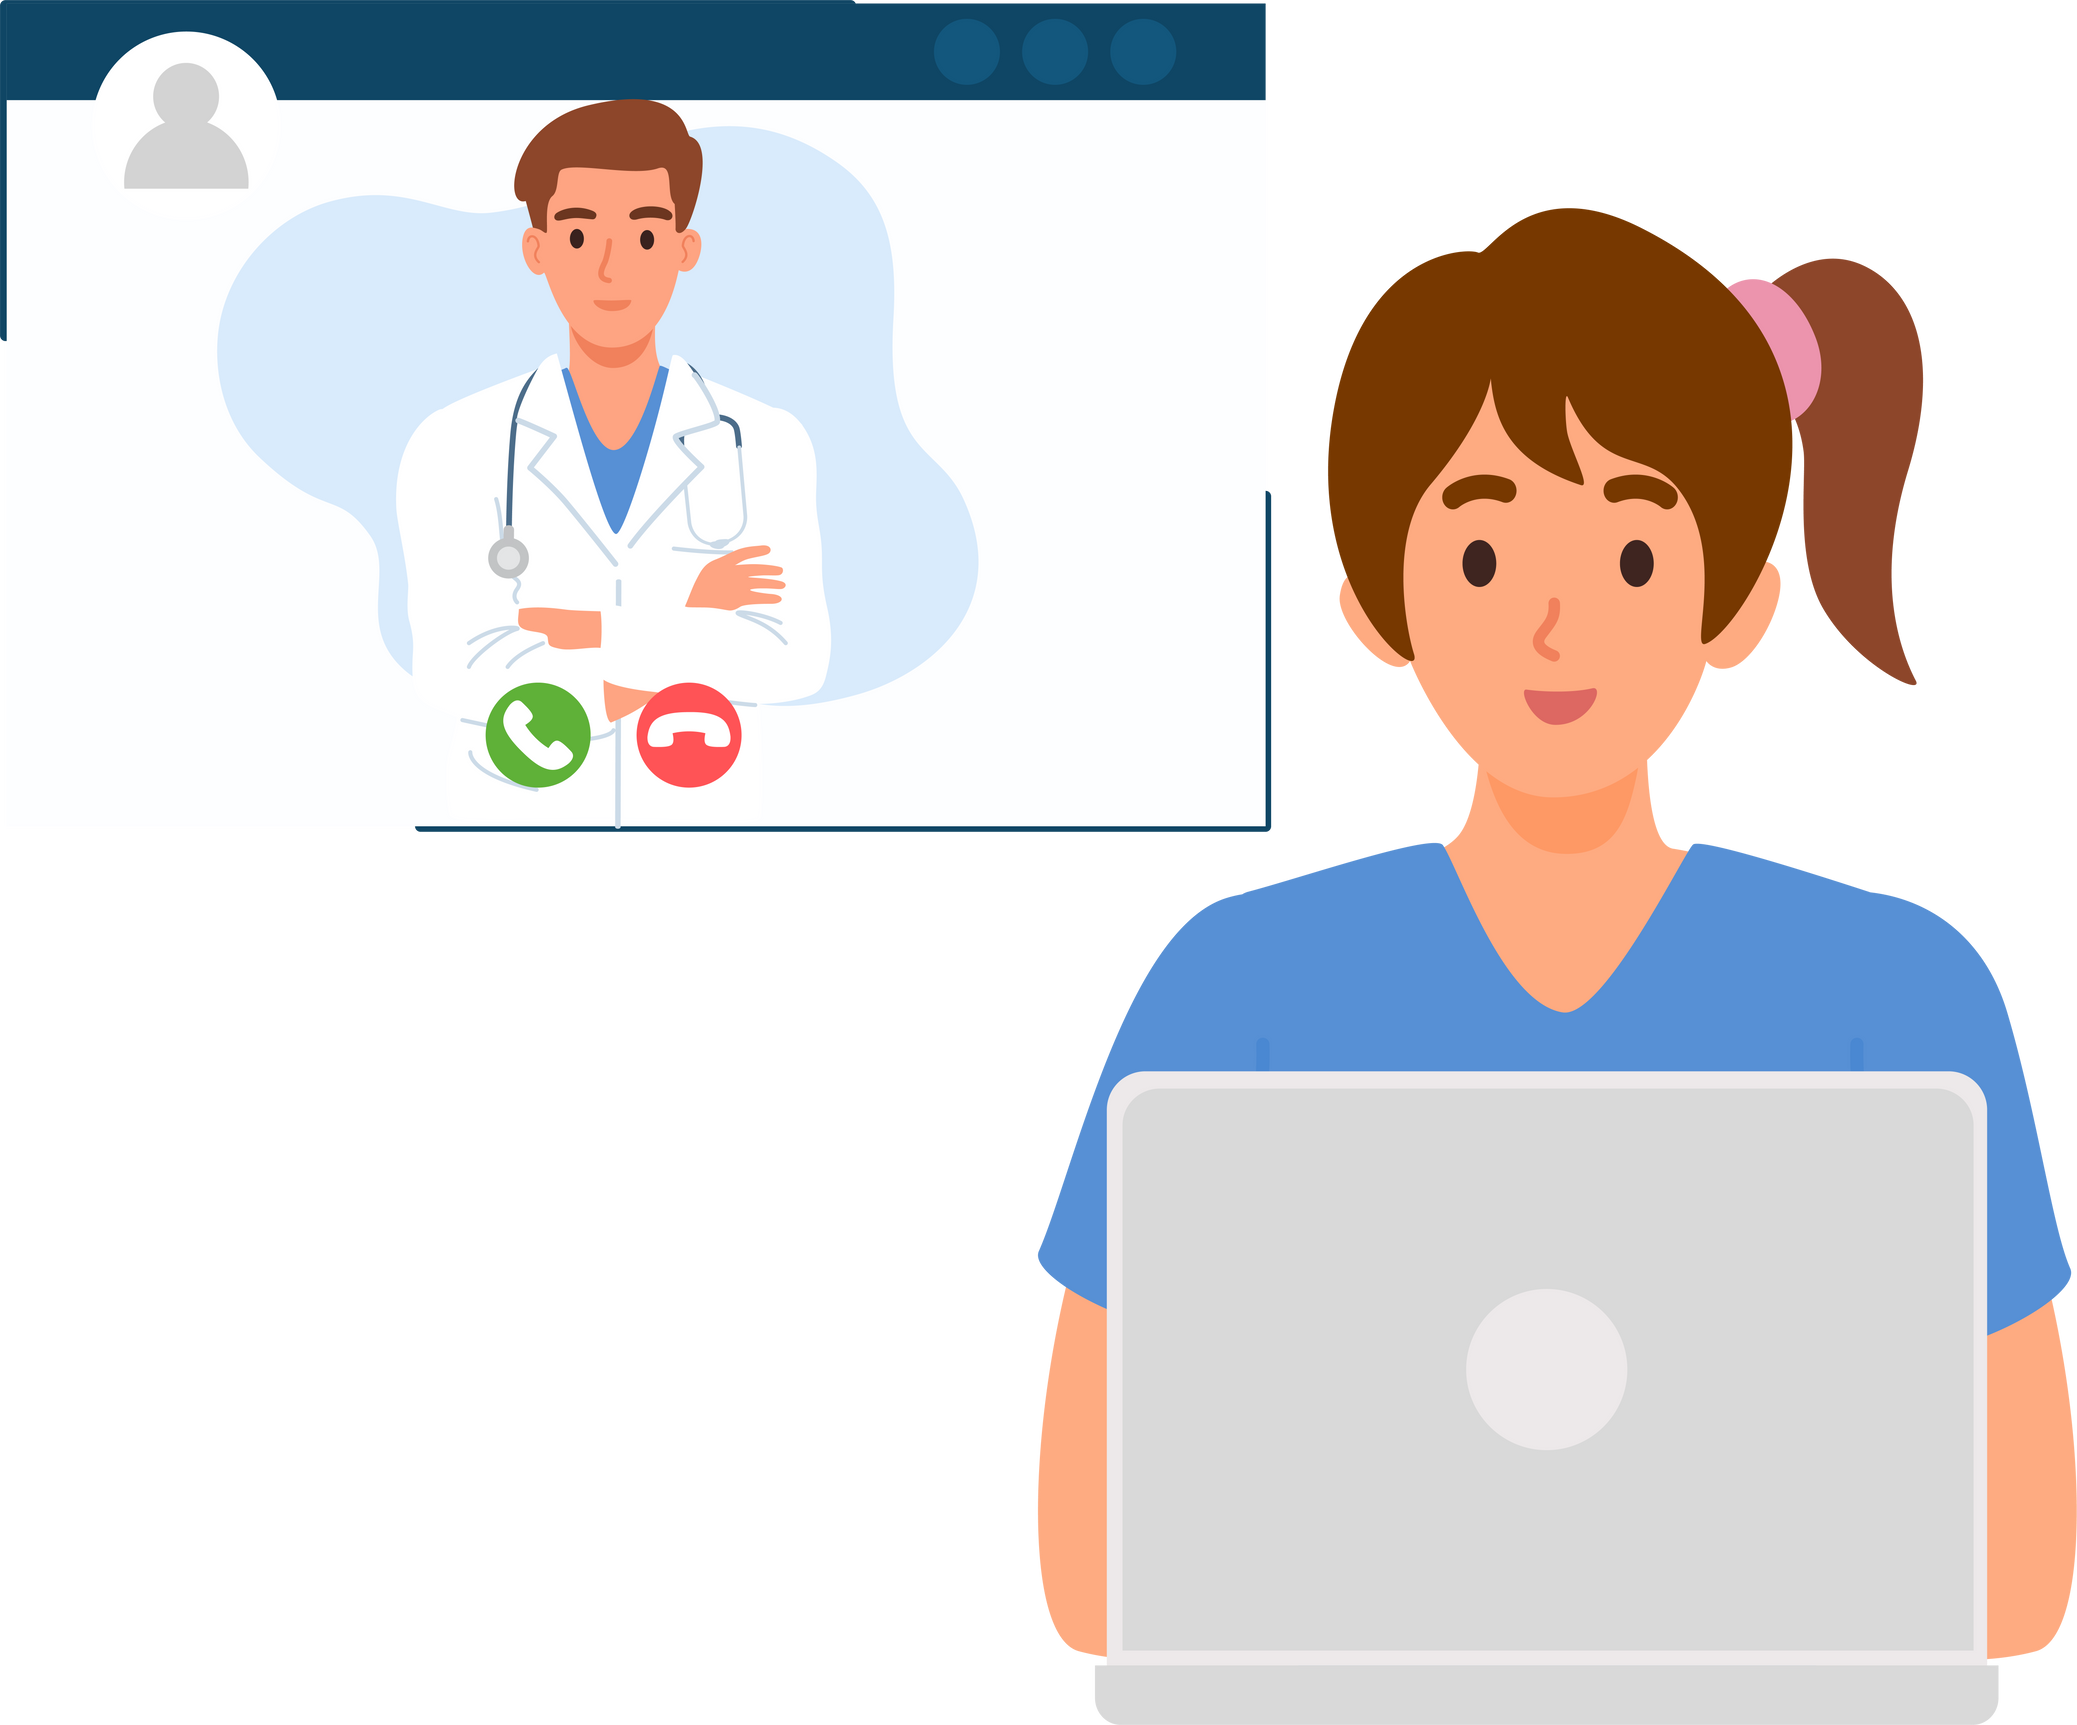 Online doctor talking with a patient on a video call through smartphone or computer. Telemedicine and online healthcare. Medical telehealth concept.